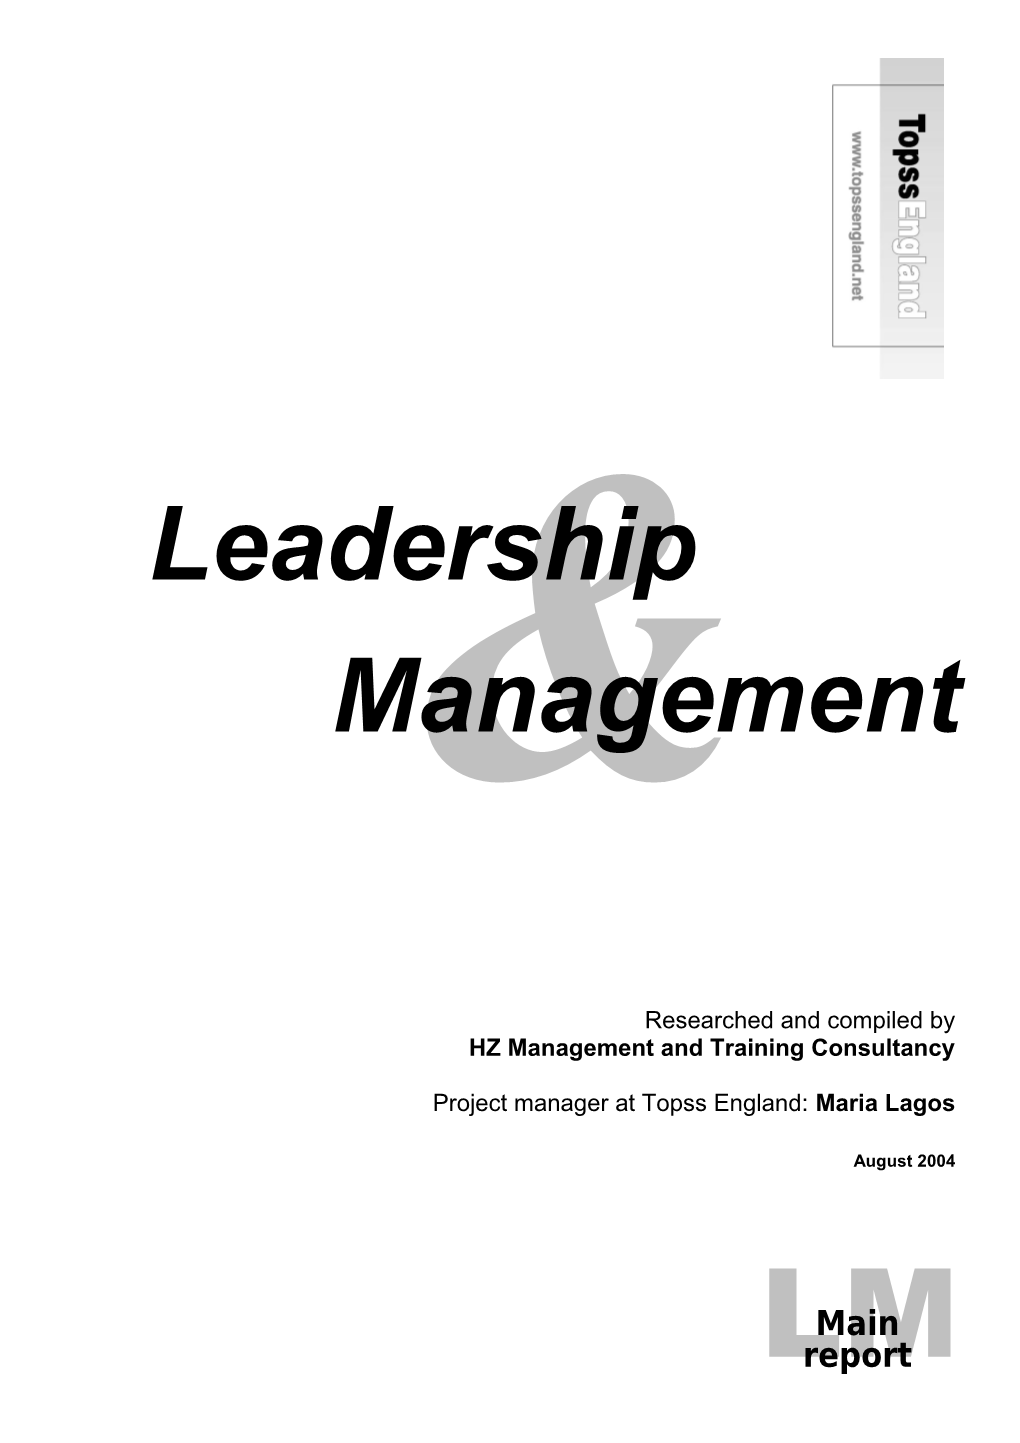 Draft Outline for Leadership and Management Final Report